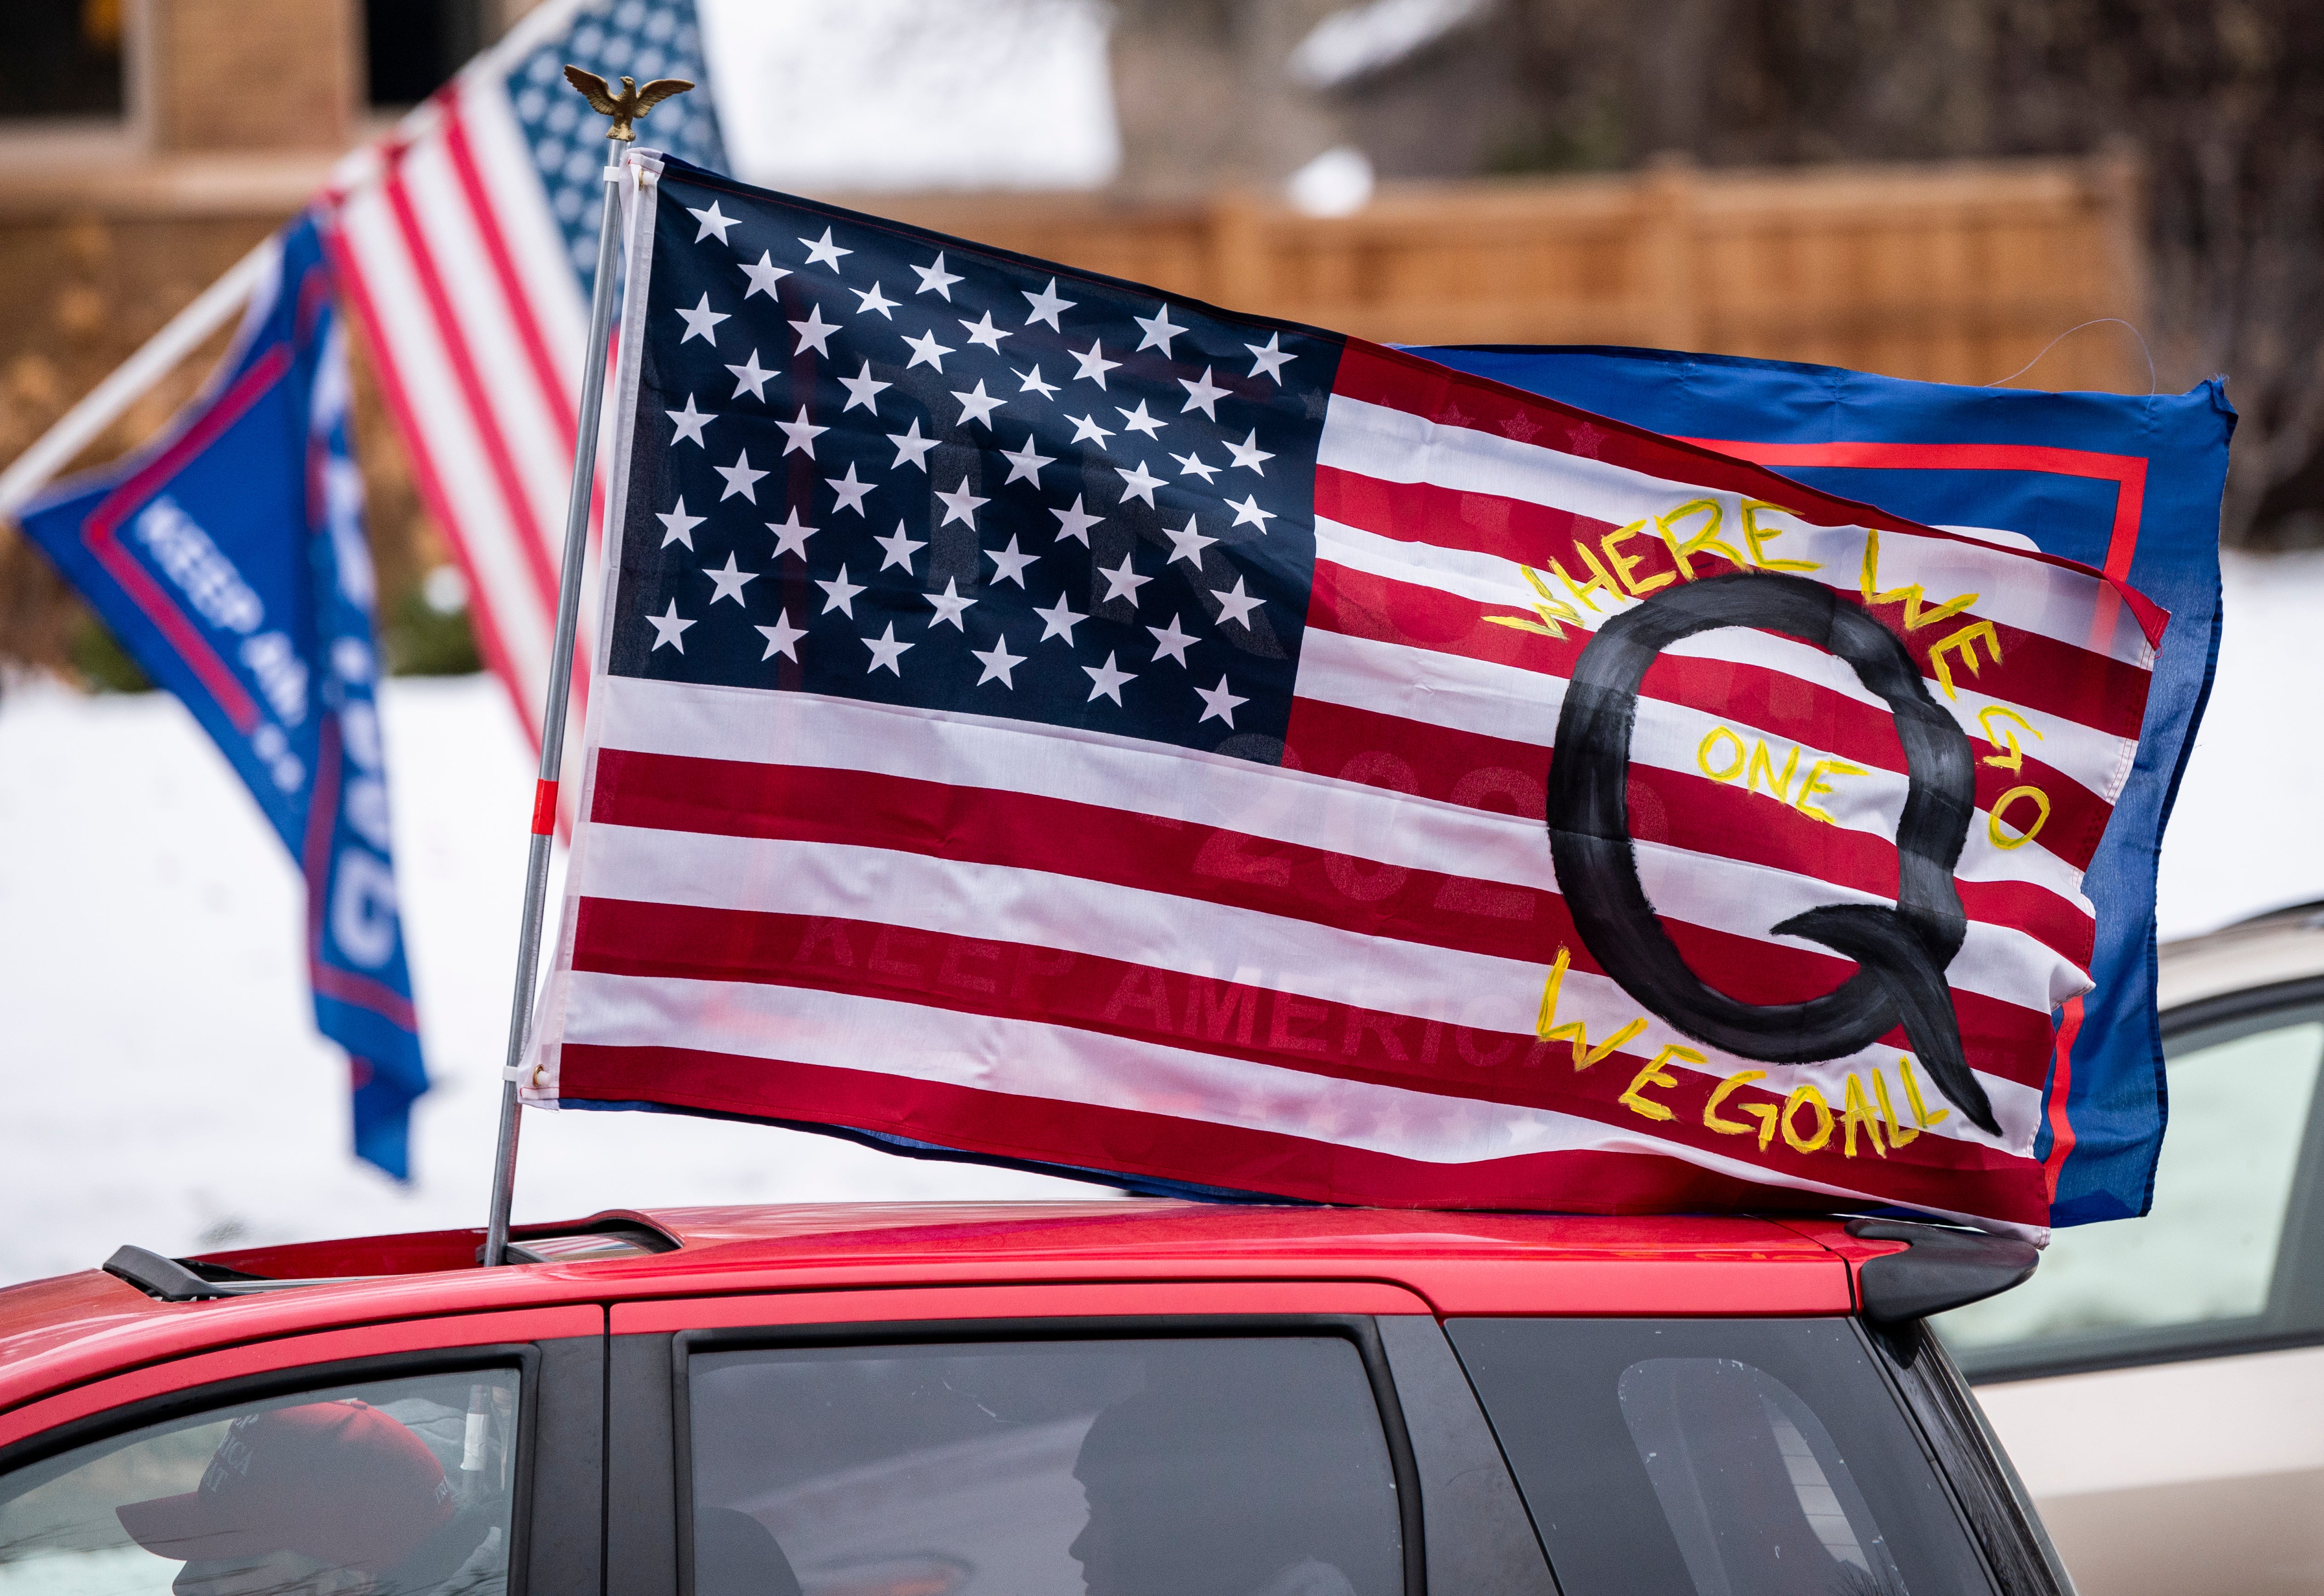 A car with a flag endorsing QAnon drives by outside the Governor's Mansion on 14 November 2020 in St Paul, Minnesota